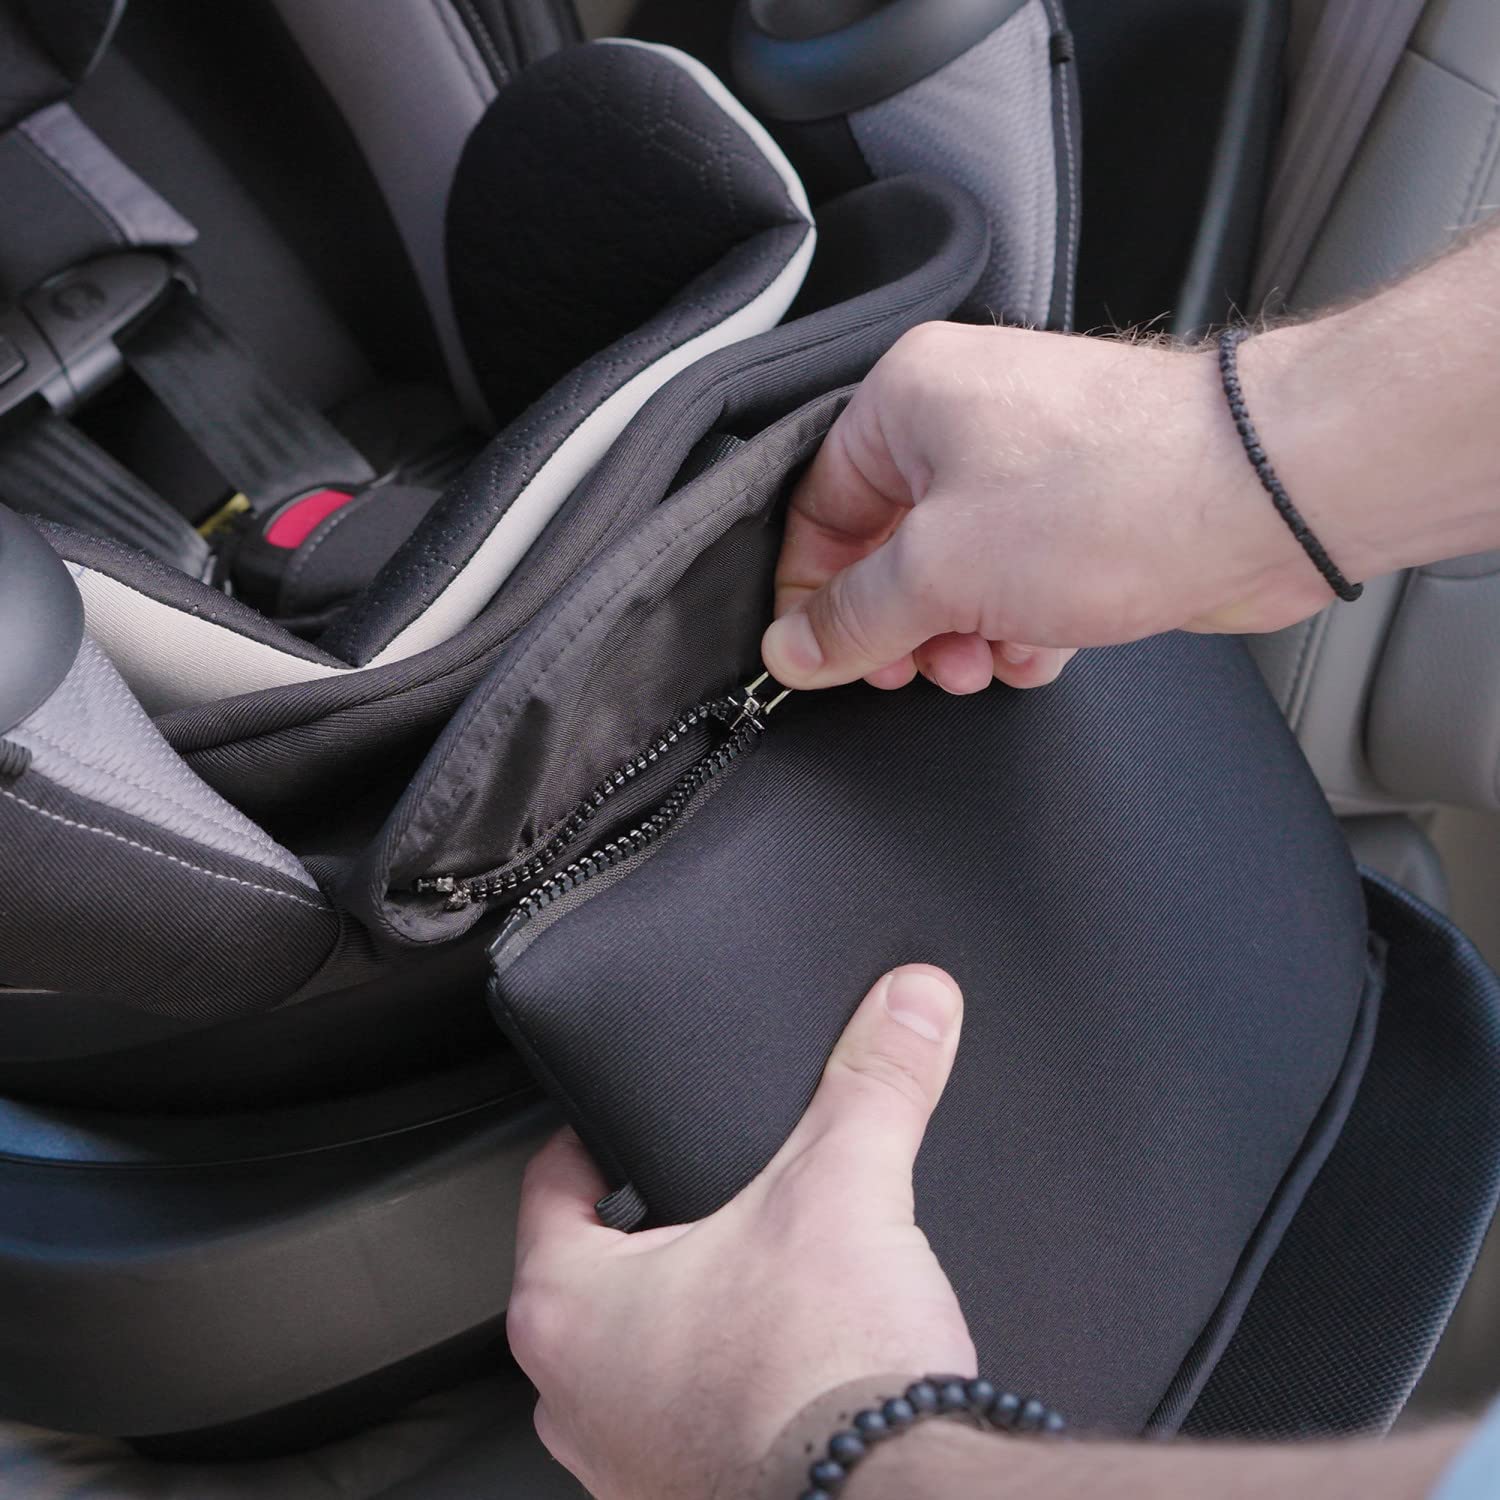 Evenflo Revolve360 Extend All-in-One Rotational Car Seat with Quick Clean Cover (Revere Gray)